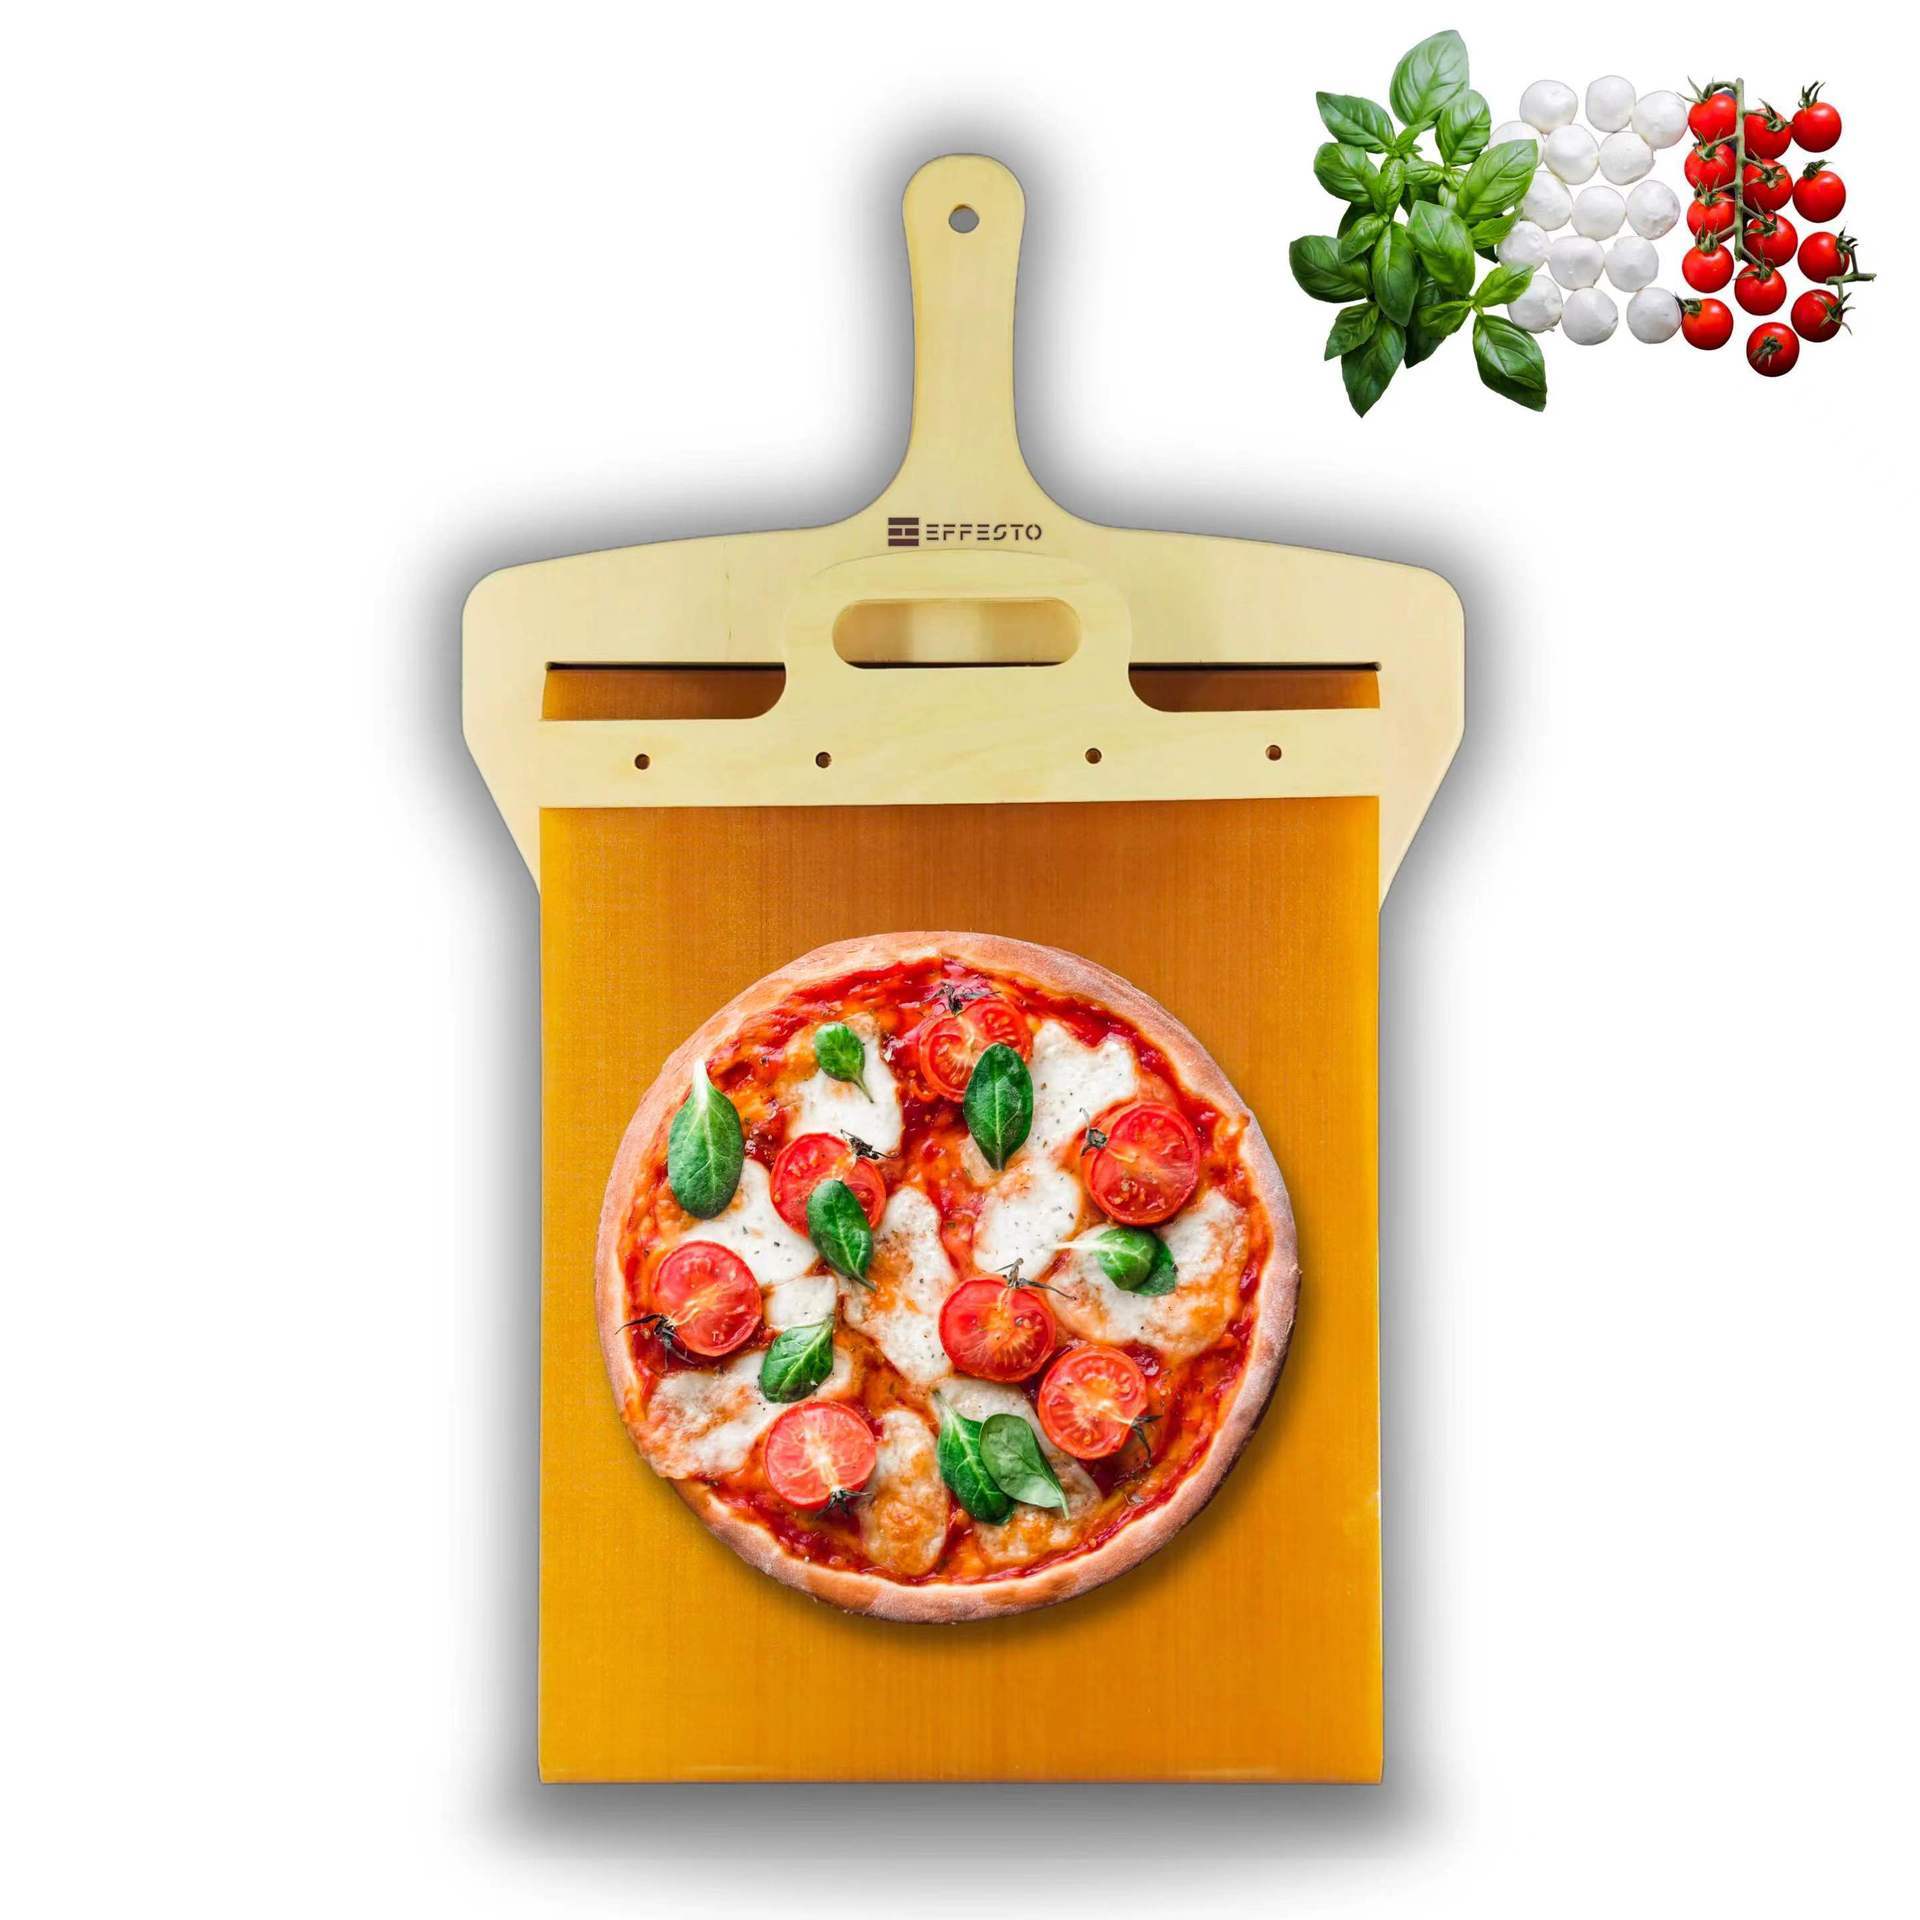 Kitchen Gadgets Sliding Pizza Shovel Non Stick Pizza Smooth Cutting Board Storage Transfer Board Kitchen Baking Tool - The Martify